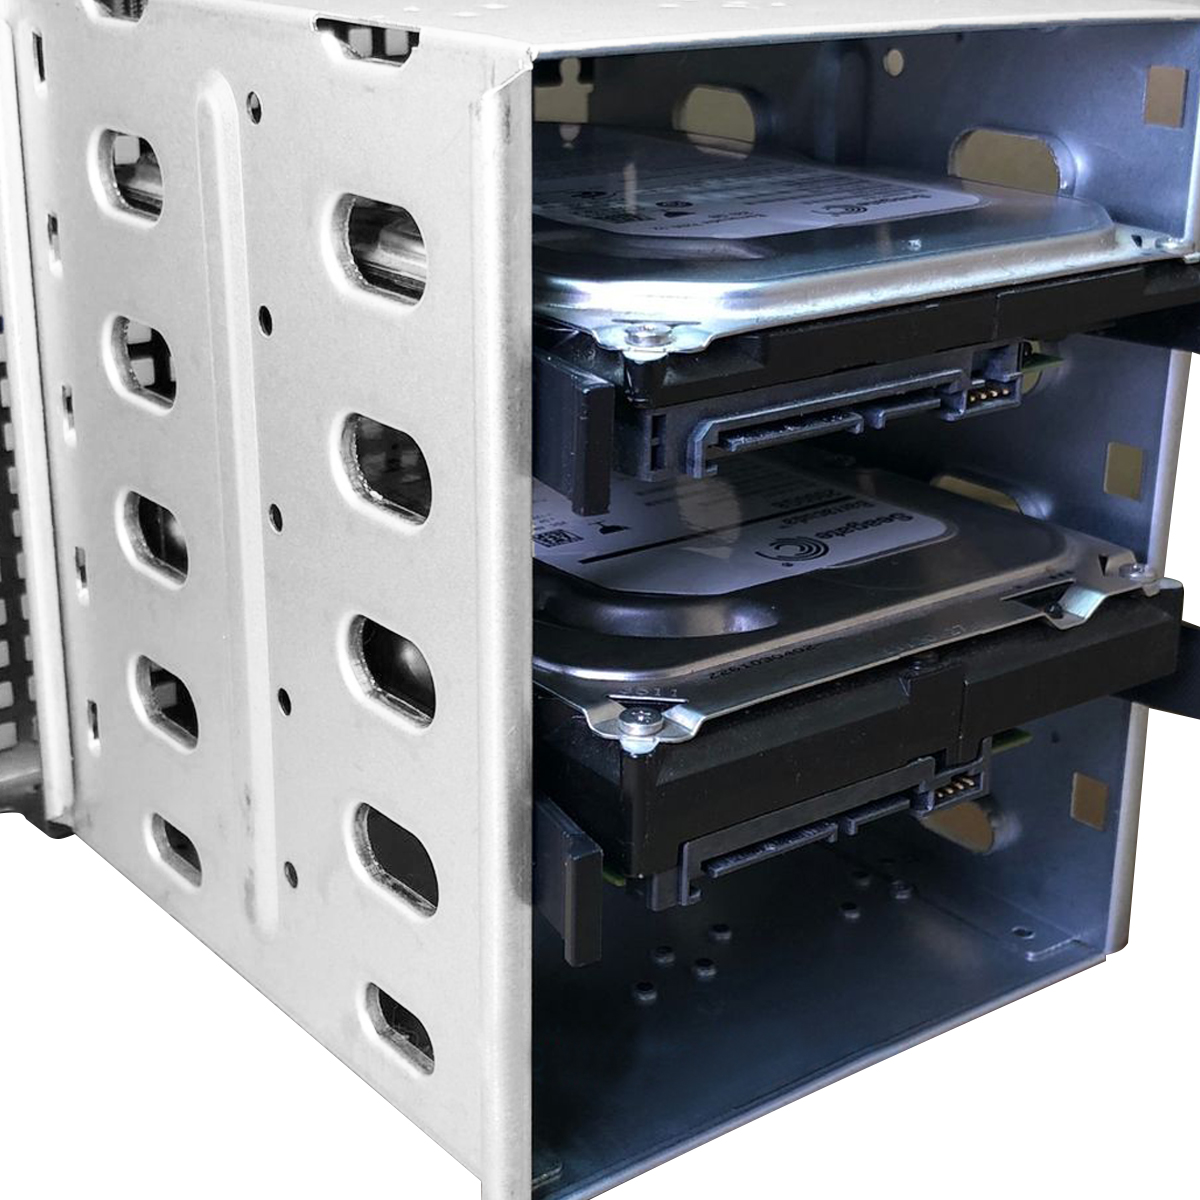 5.25" to 5x 3.5" SATA SAS HDD Cage Rack Hard Drive Tray Caddy Converter with Fan Space 20